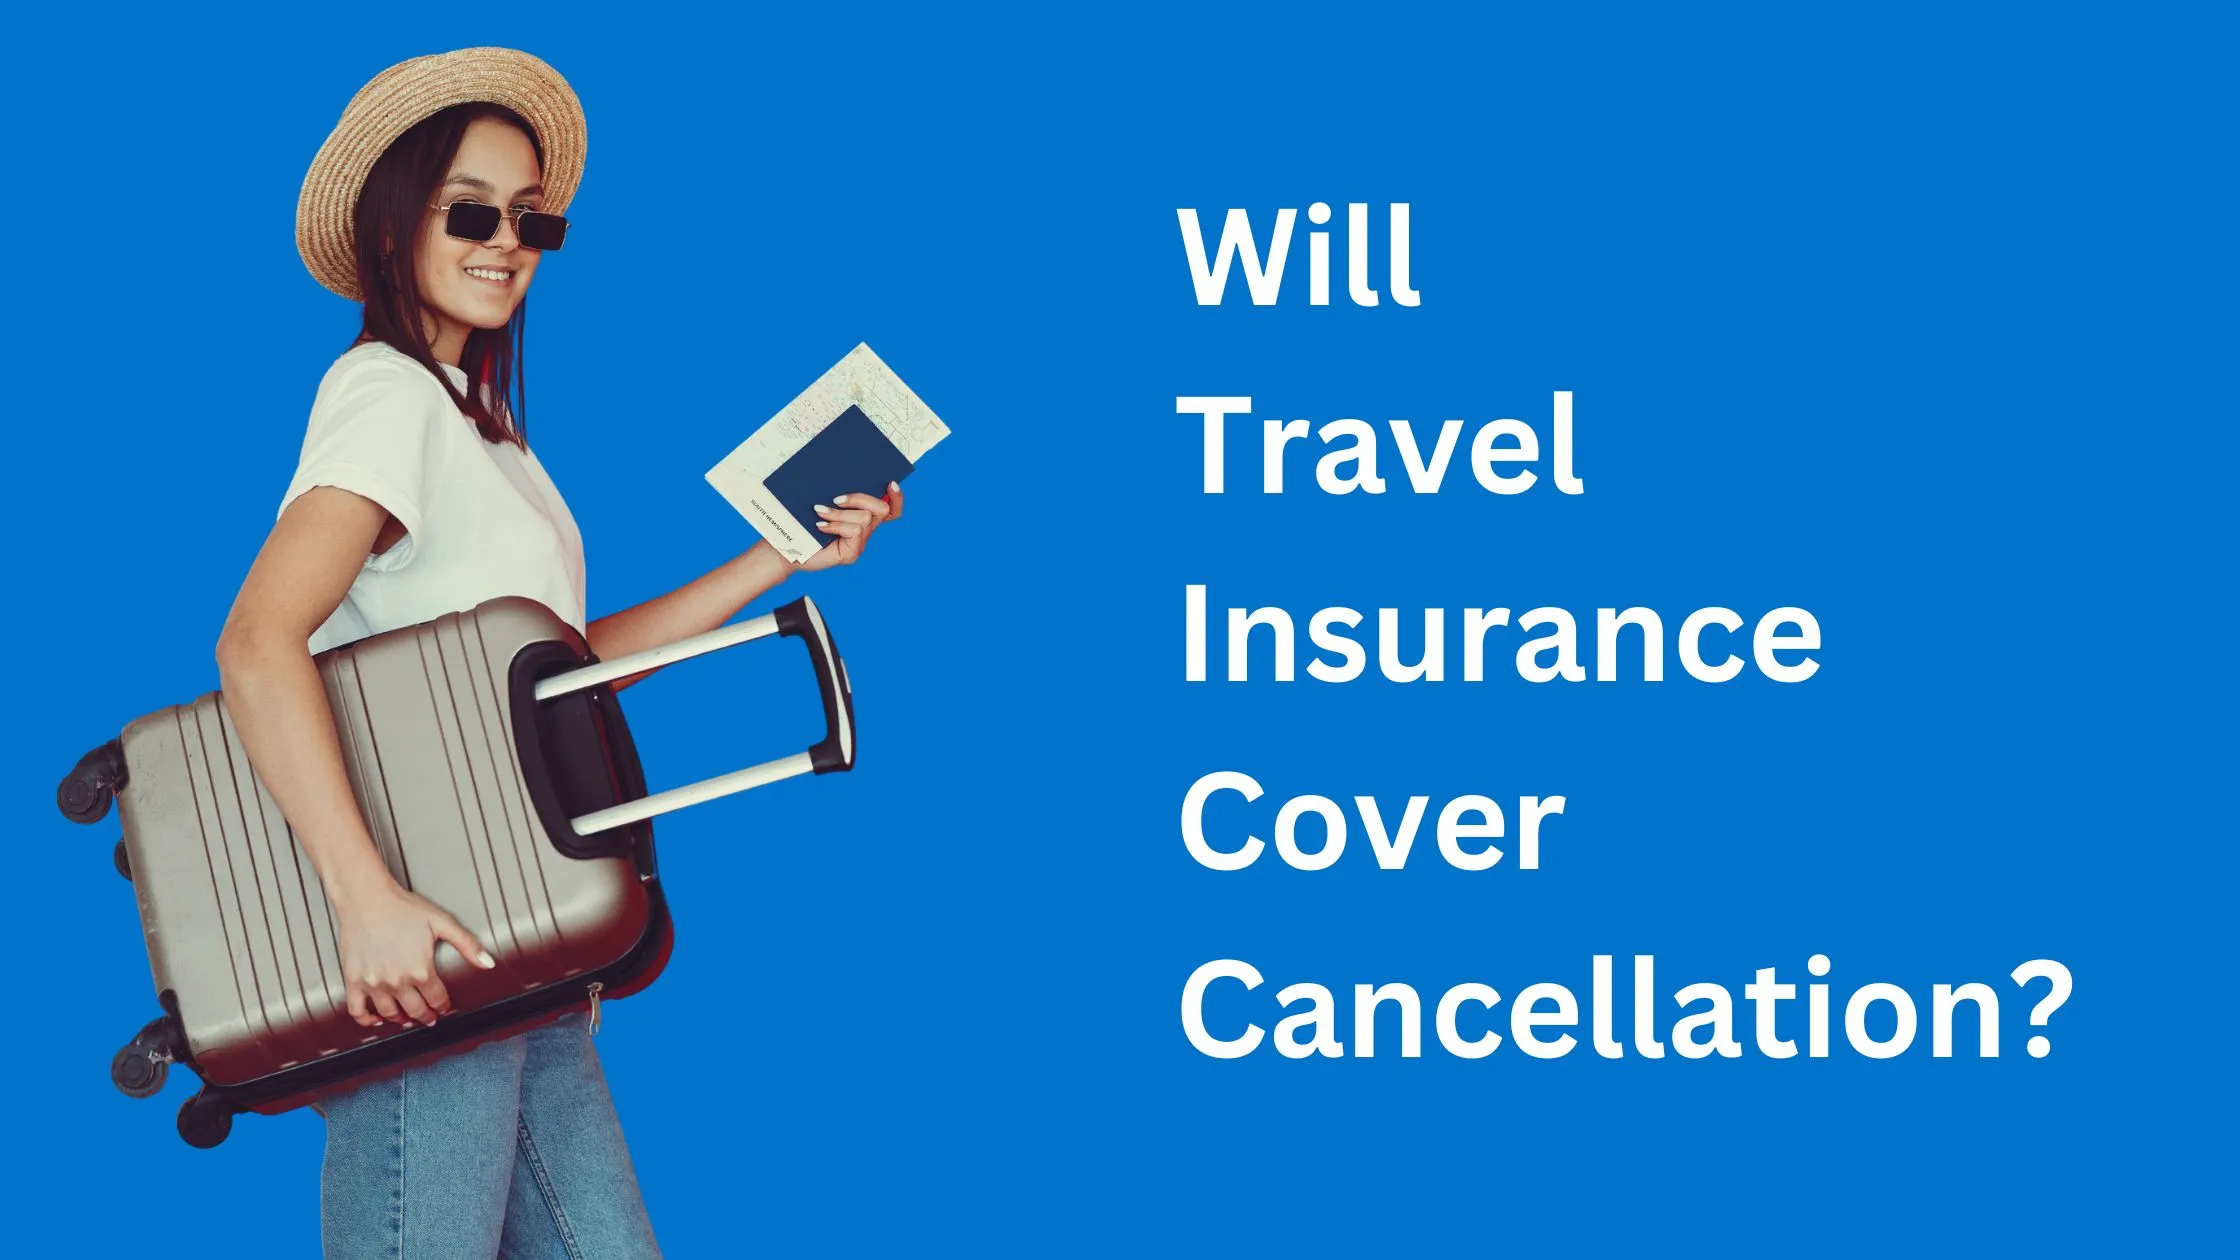 Will Travel Insurance Cover Cancellation? A Comprehensive Guide